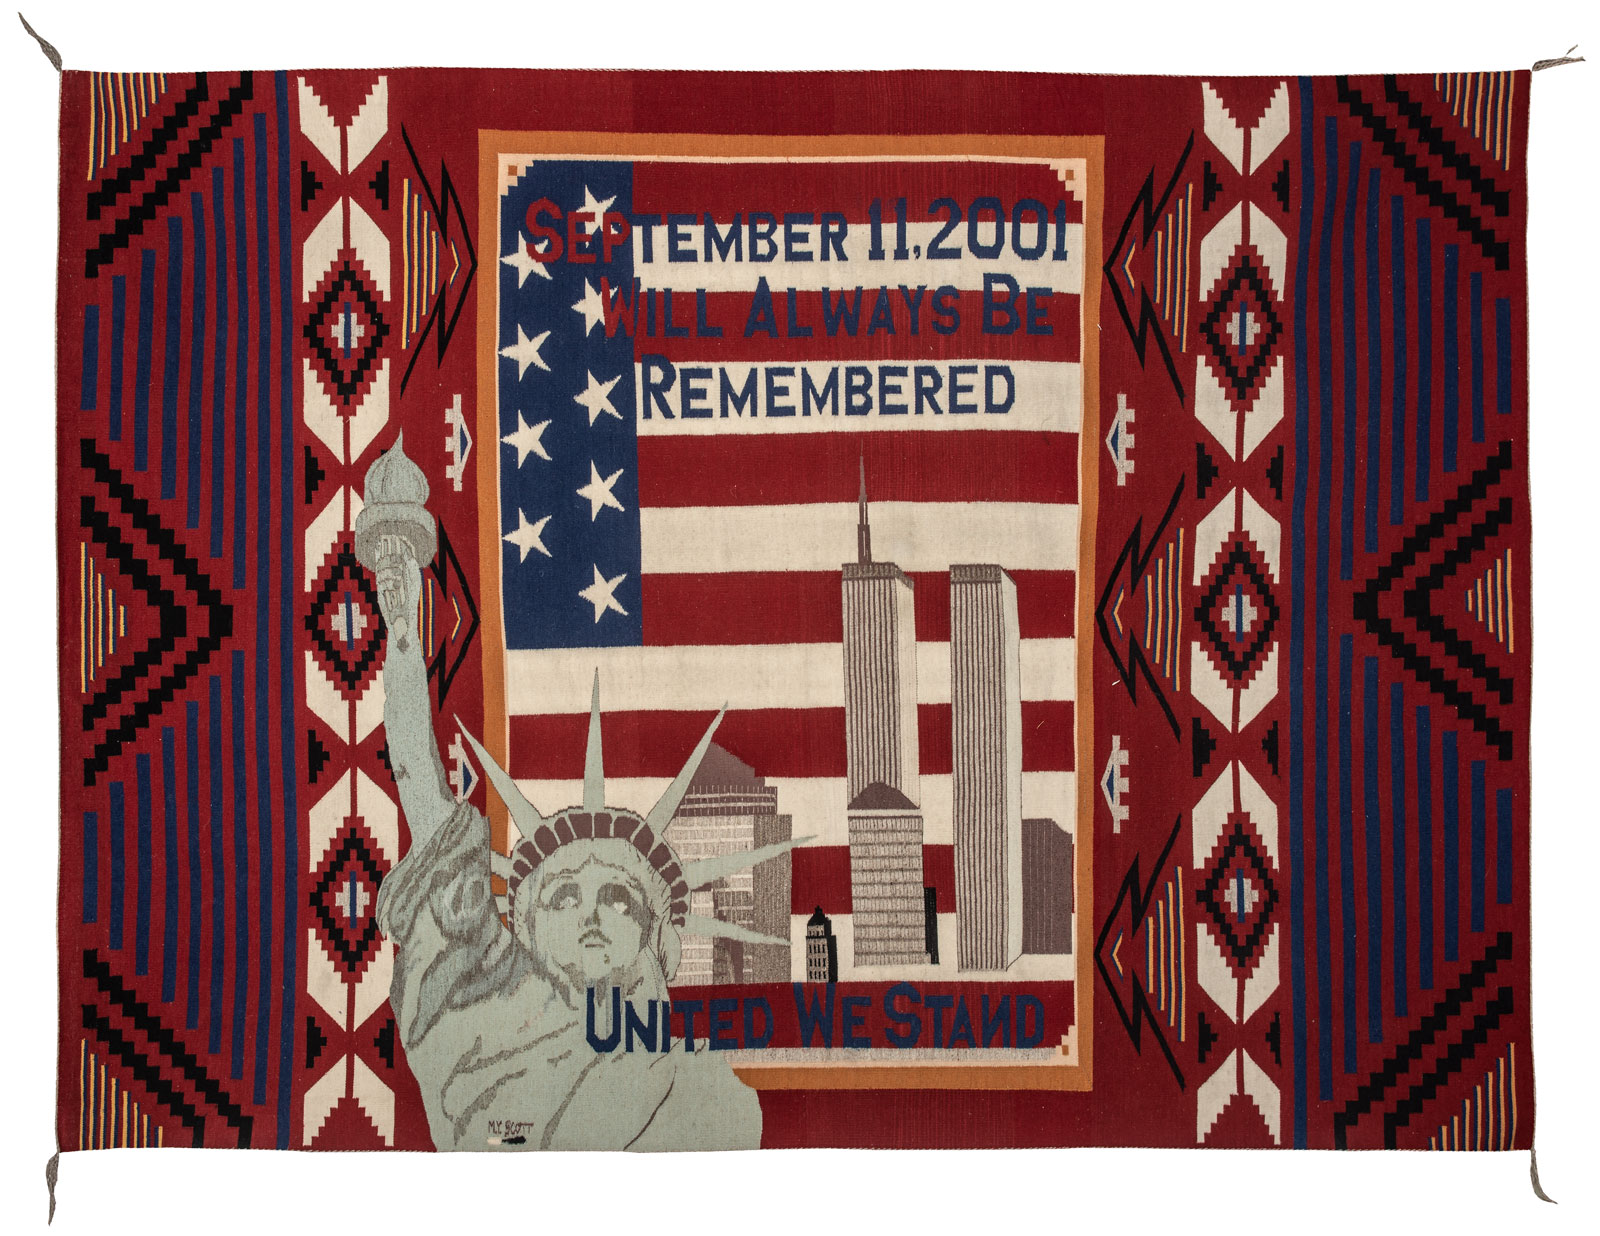 Marilyn Y. Scott, Diné, born Blue Canyon, Arizona 1983; lives Tuba City, Arizona, September 11 Tribute Rug, began November 2001, completed 2002, aniline dye on wool, Albuquerque Museum, museum purchase